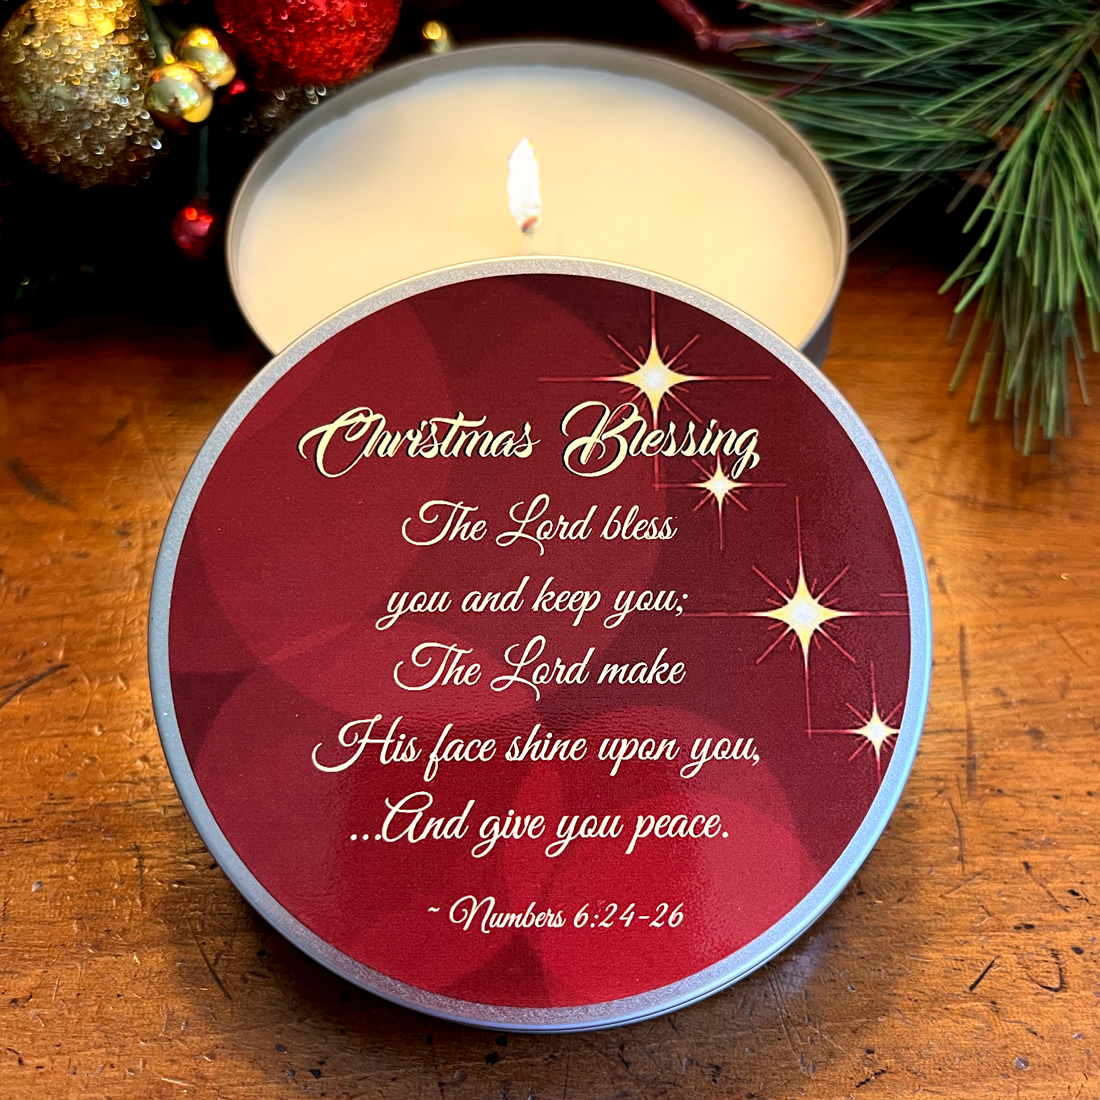 BUY 1 GET 2! "CHRISTMAS BLESSING" CANDLE - FROSTED BERRY